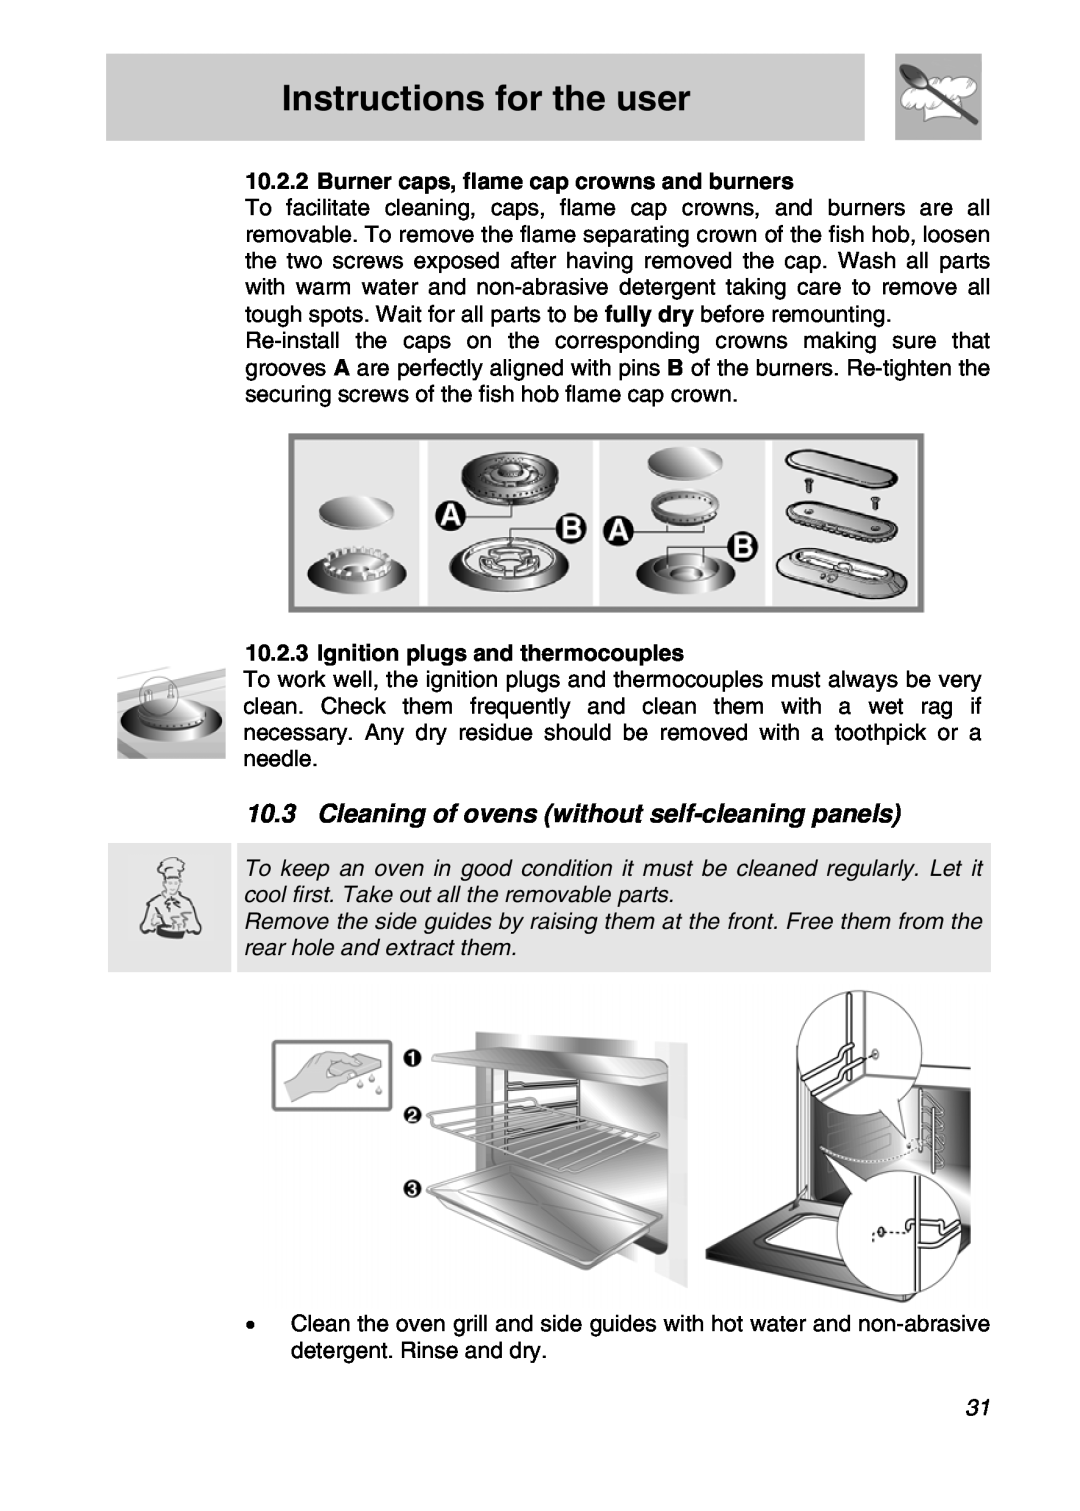 Smeg CSA19ID-6 Cleaning of ovens without self-cleaning panels, Instructions for the user, Ignition plugs and thermocouples 